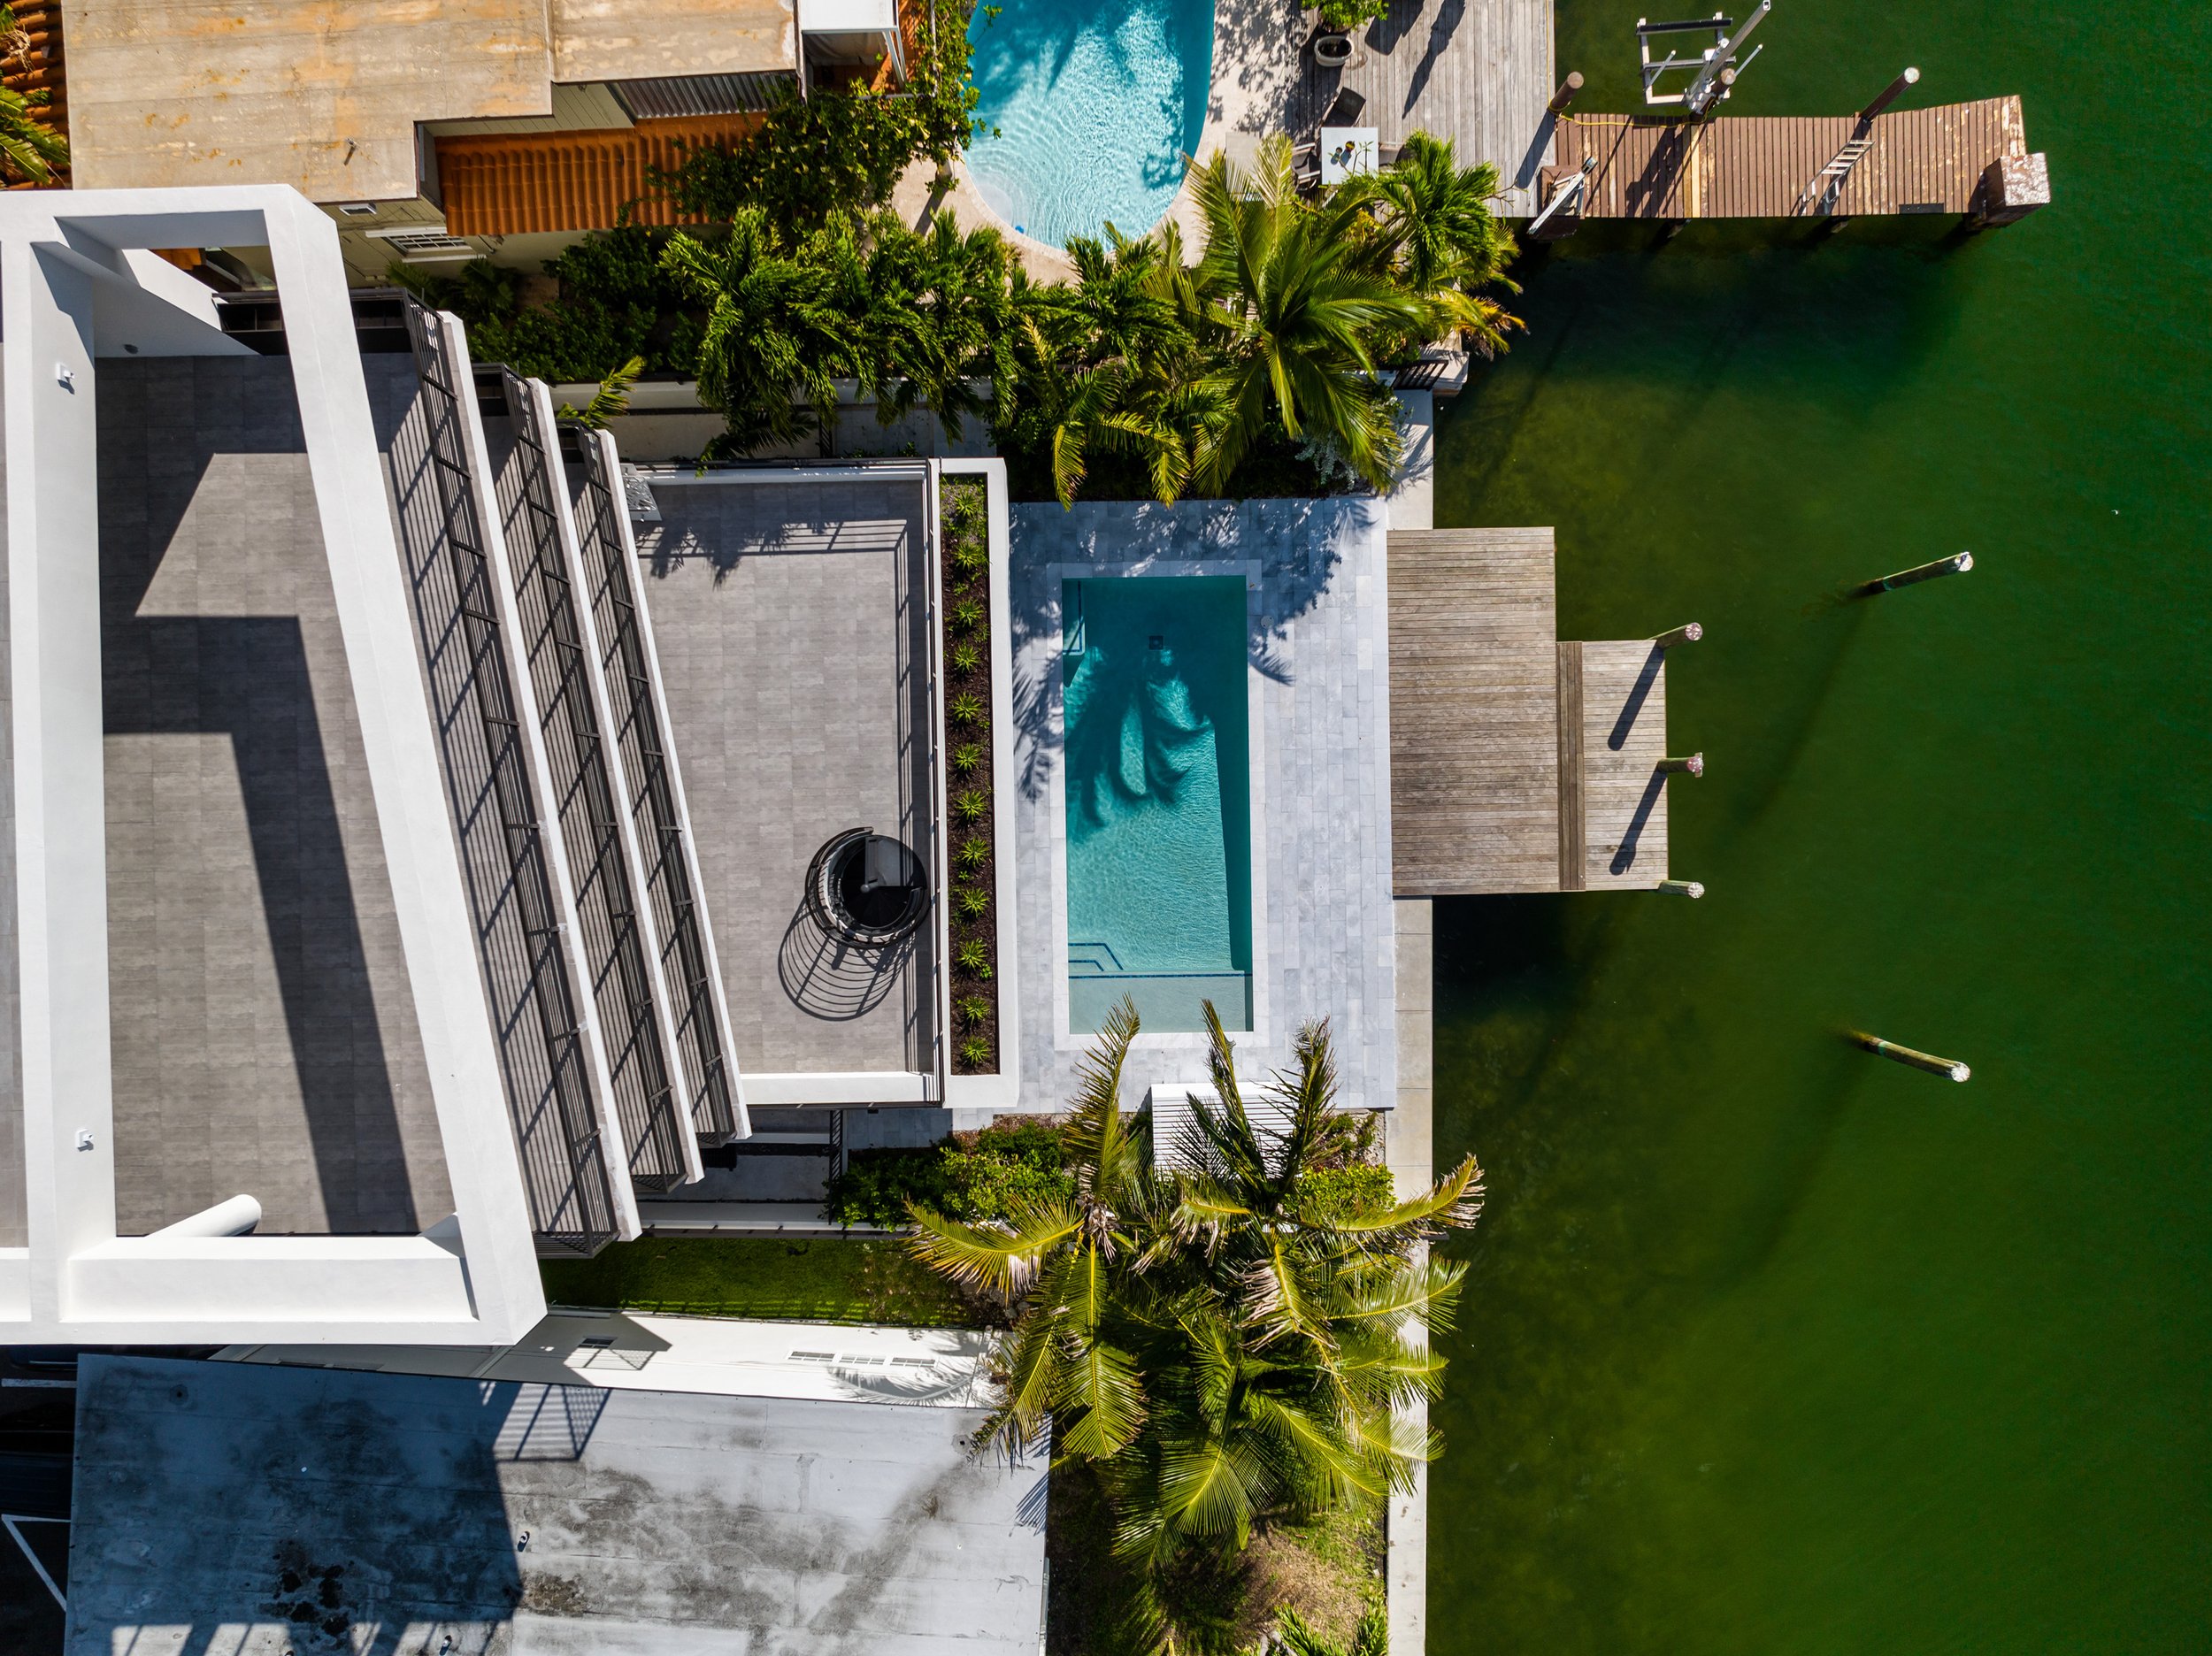 Sabal Development Sells Newly Constructed Luxury Waterfront Apartment Building On Miami Beach's Isle of Normandy 141.jpg